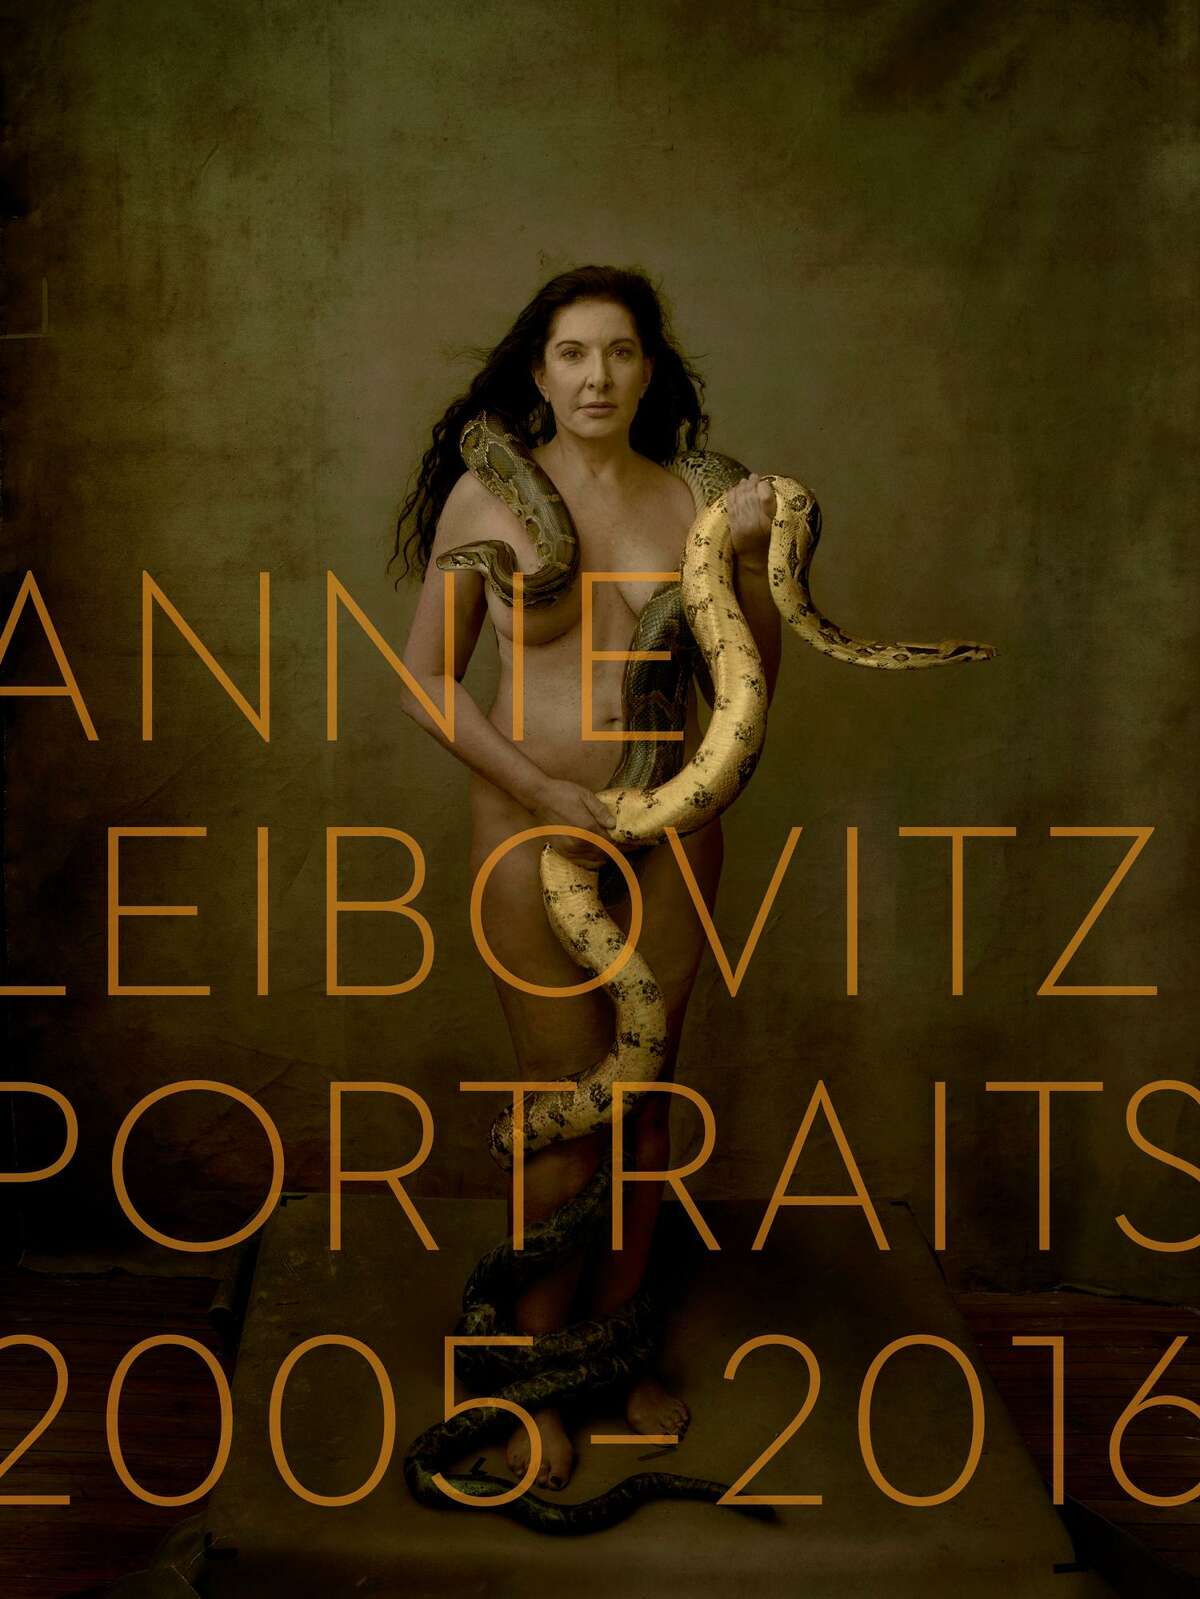 “Annie Leibovitz: Portraits 2005-2016,” which was published by Phaidon, holds dozens upon dozens of images.